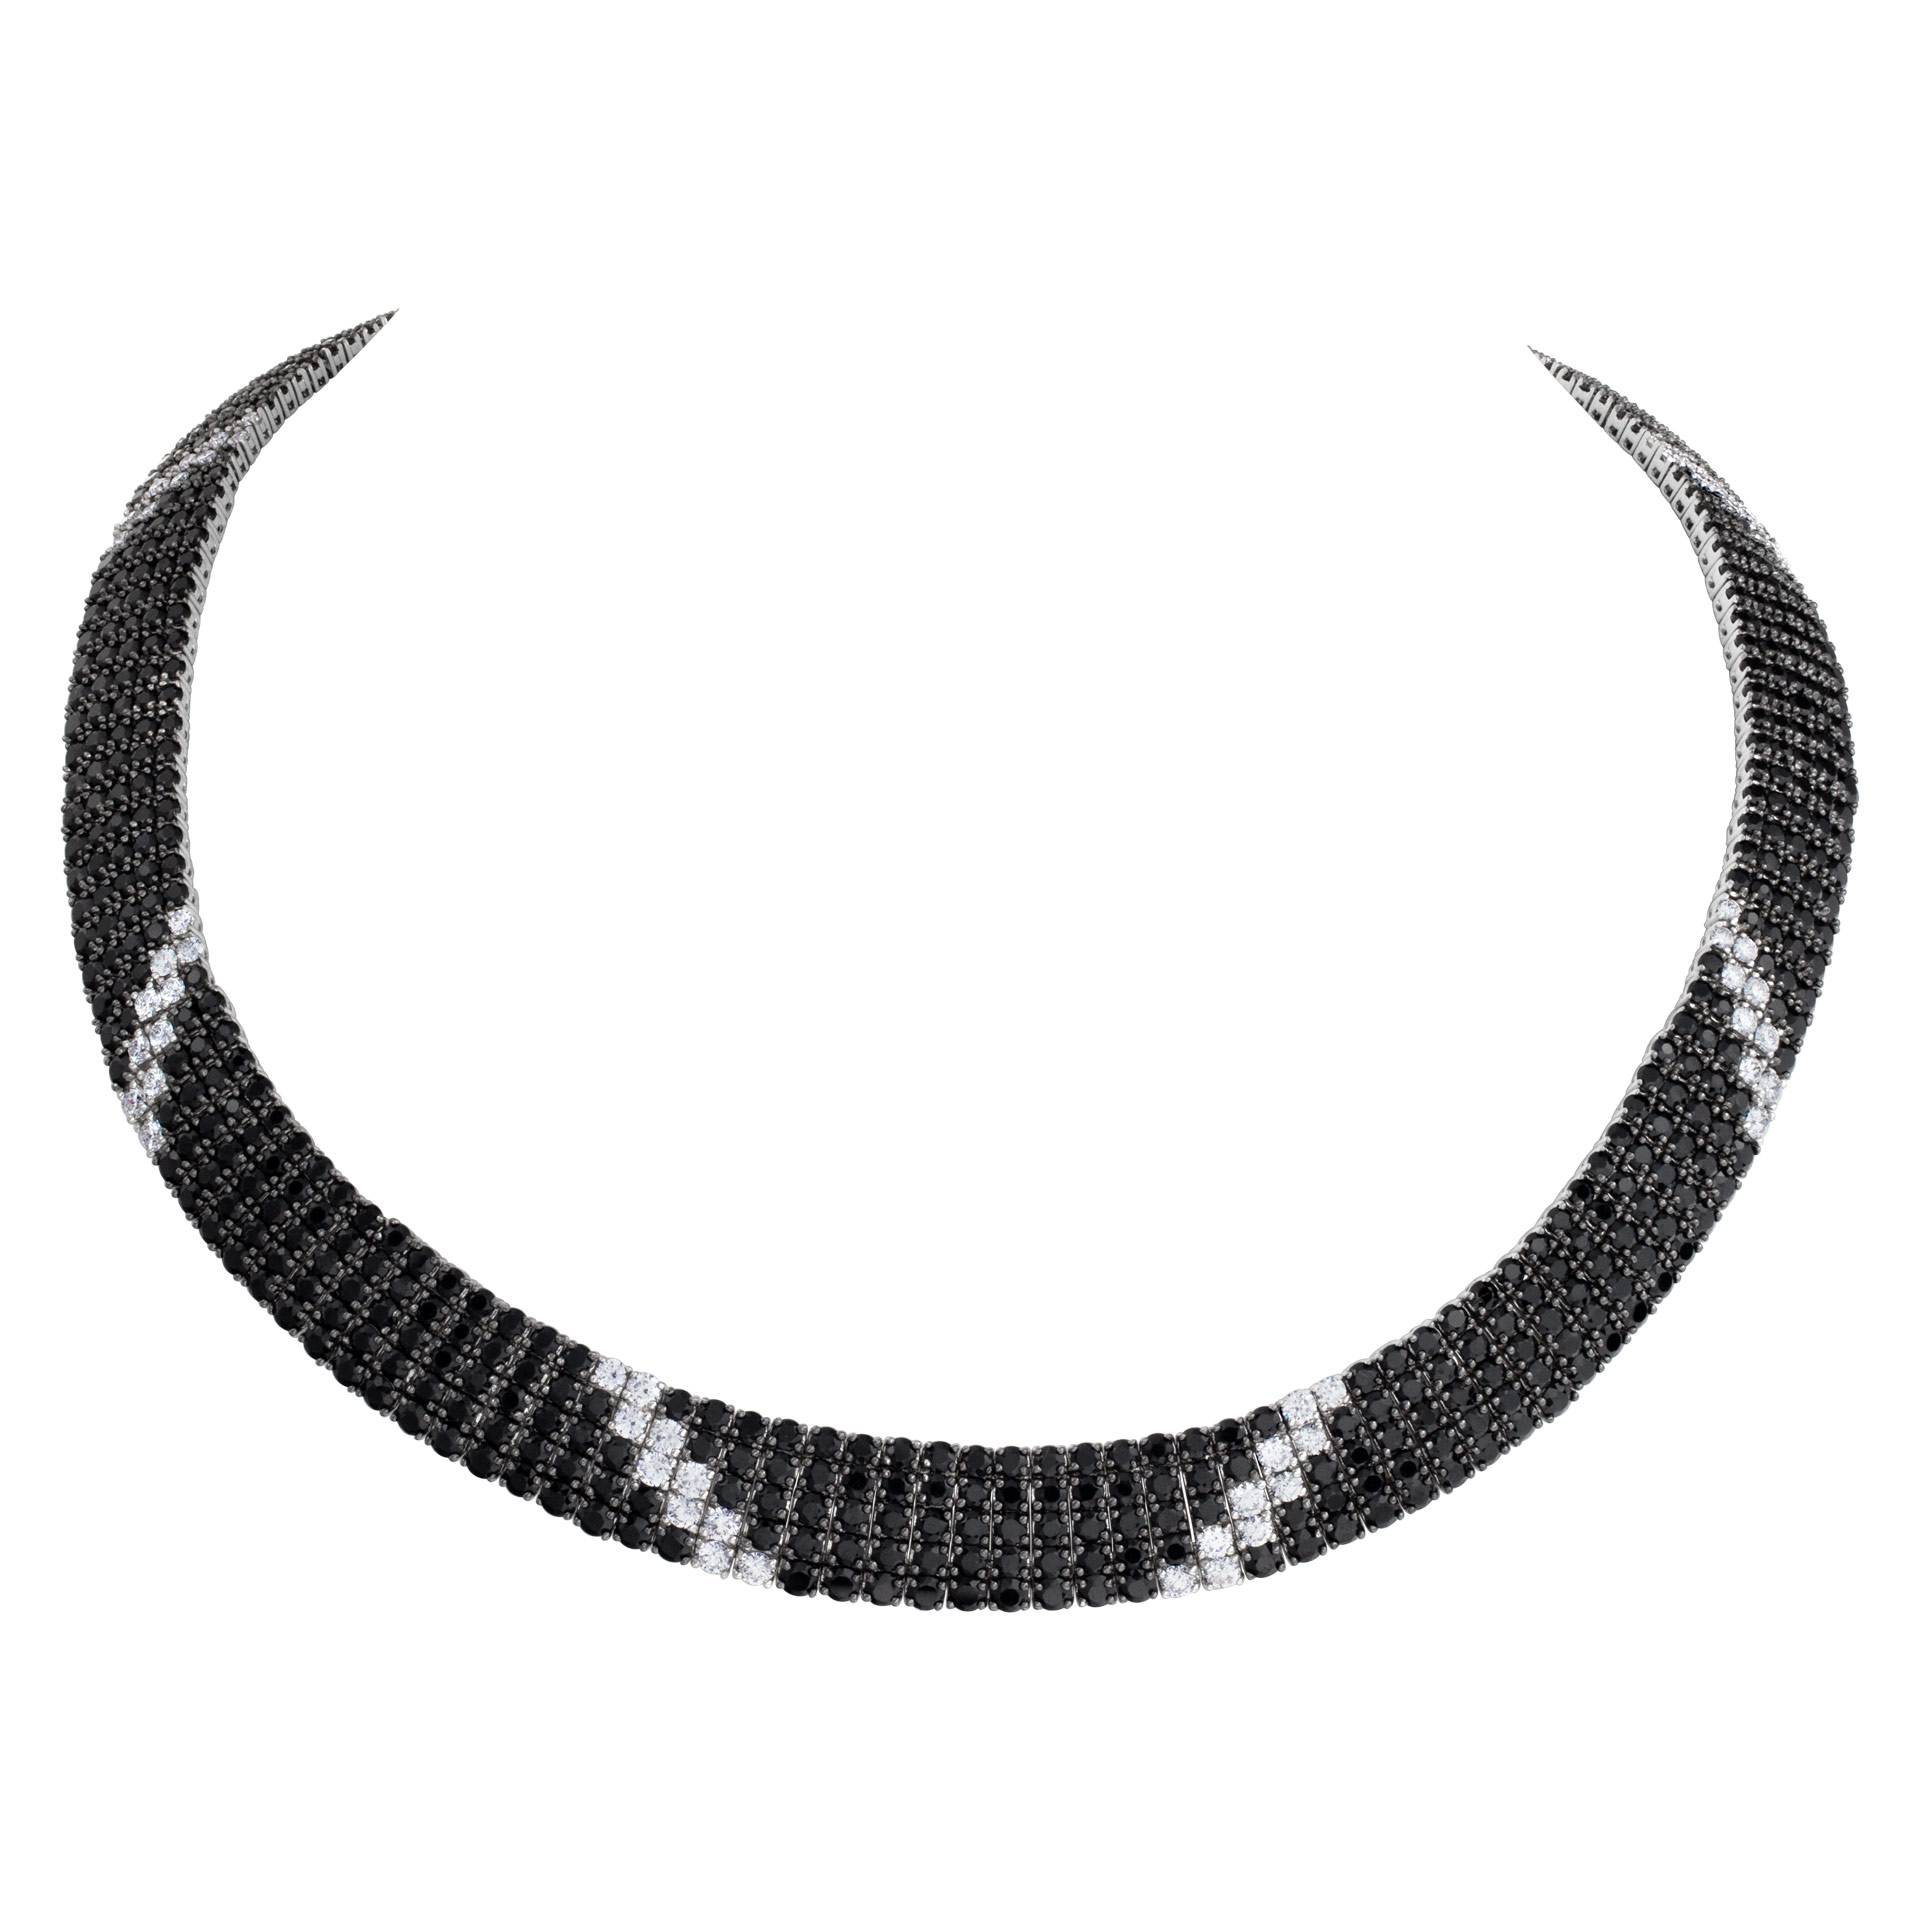 Roberto Coin Fantasia necklace with black sapphires and diamonds